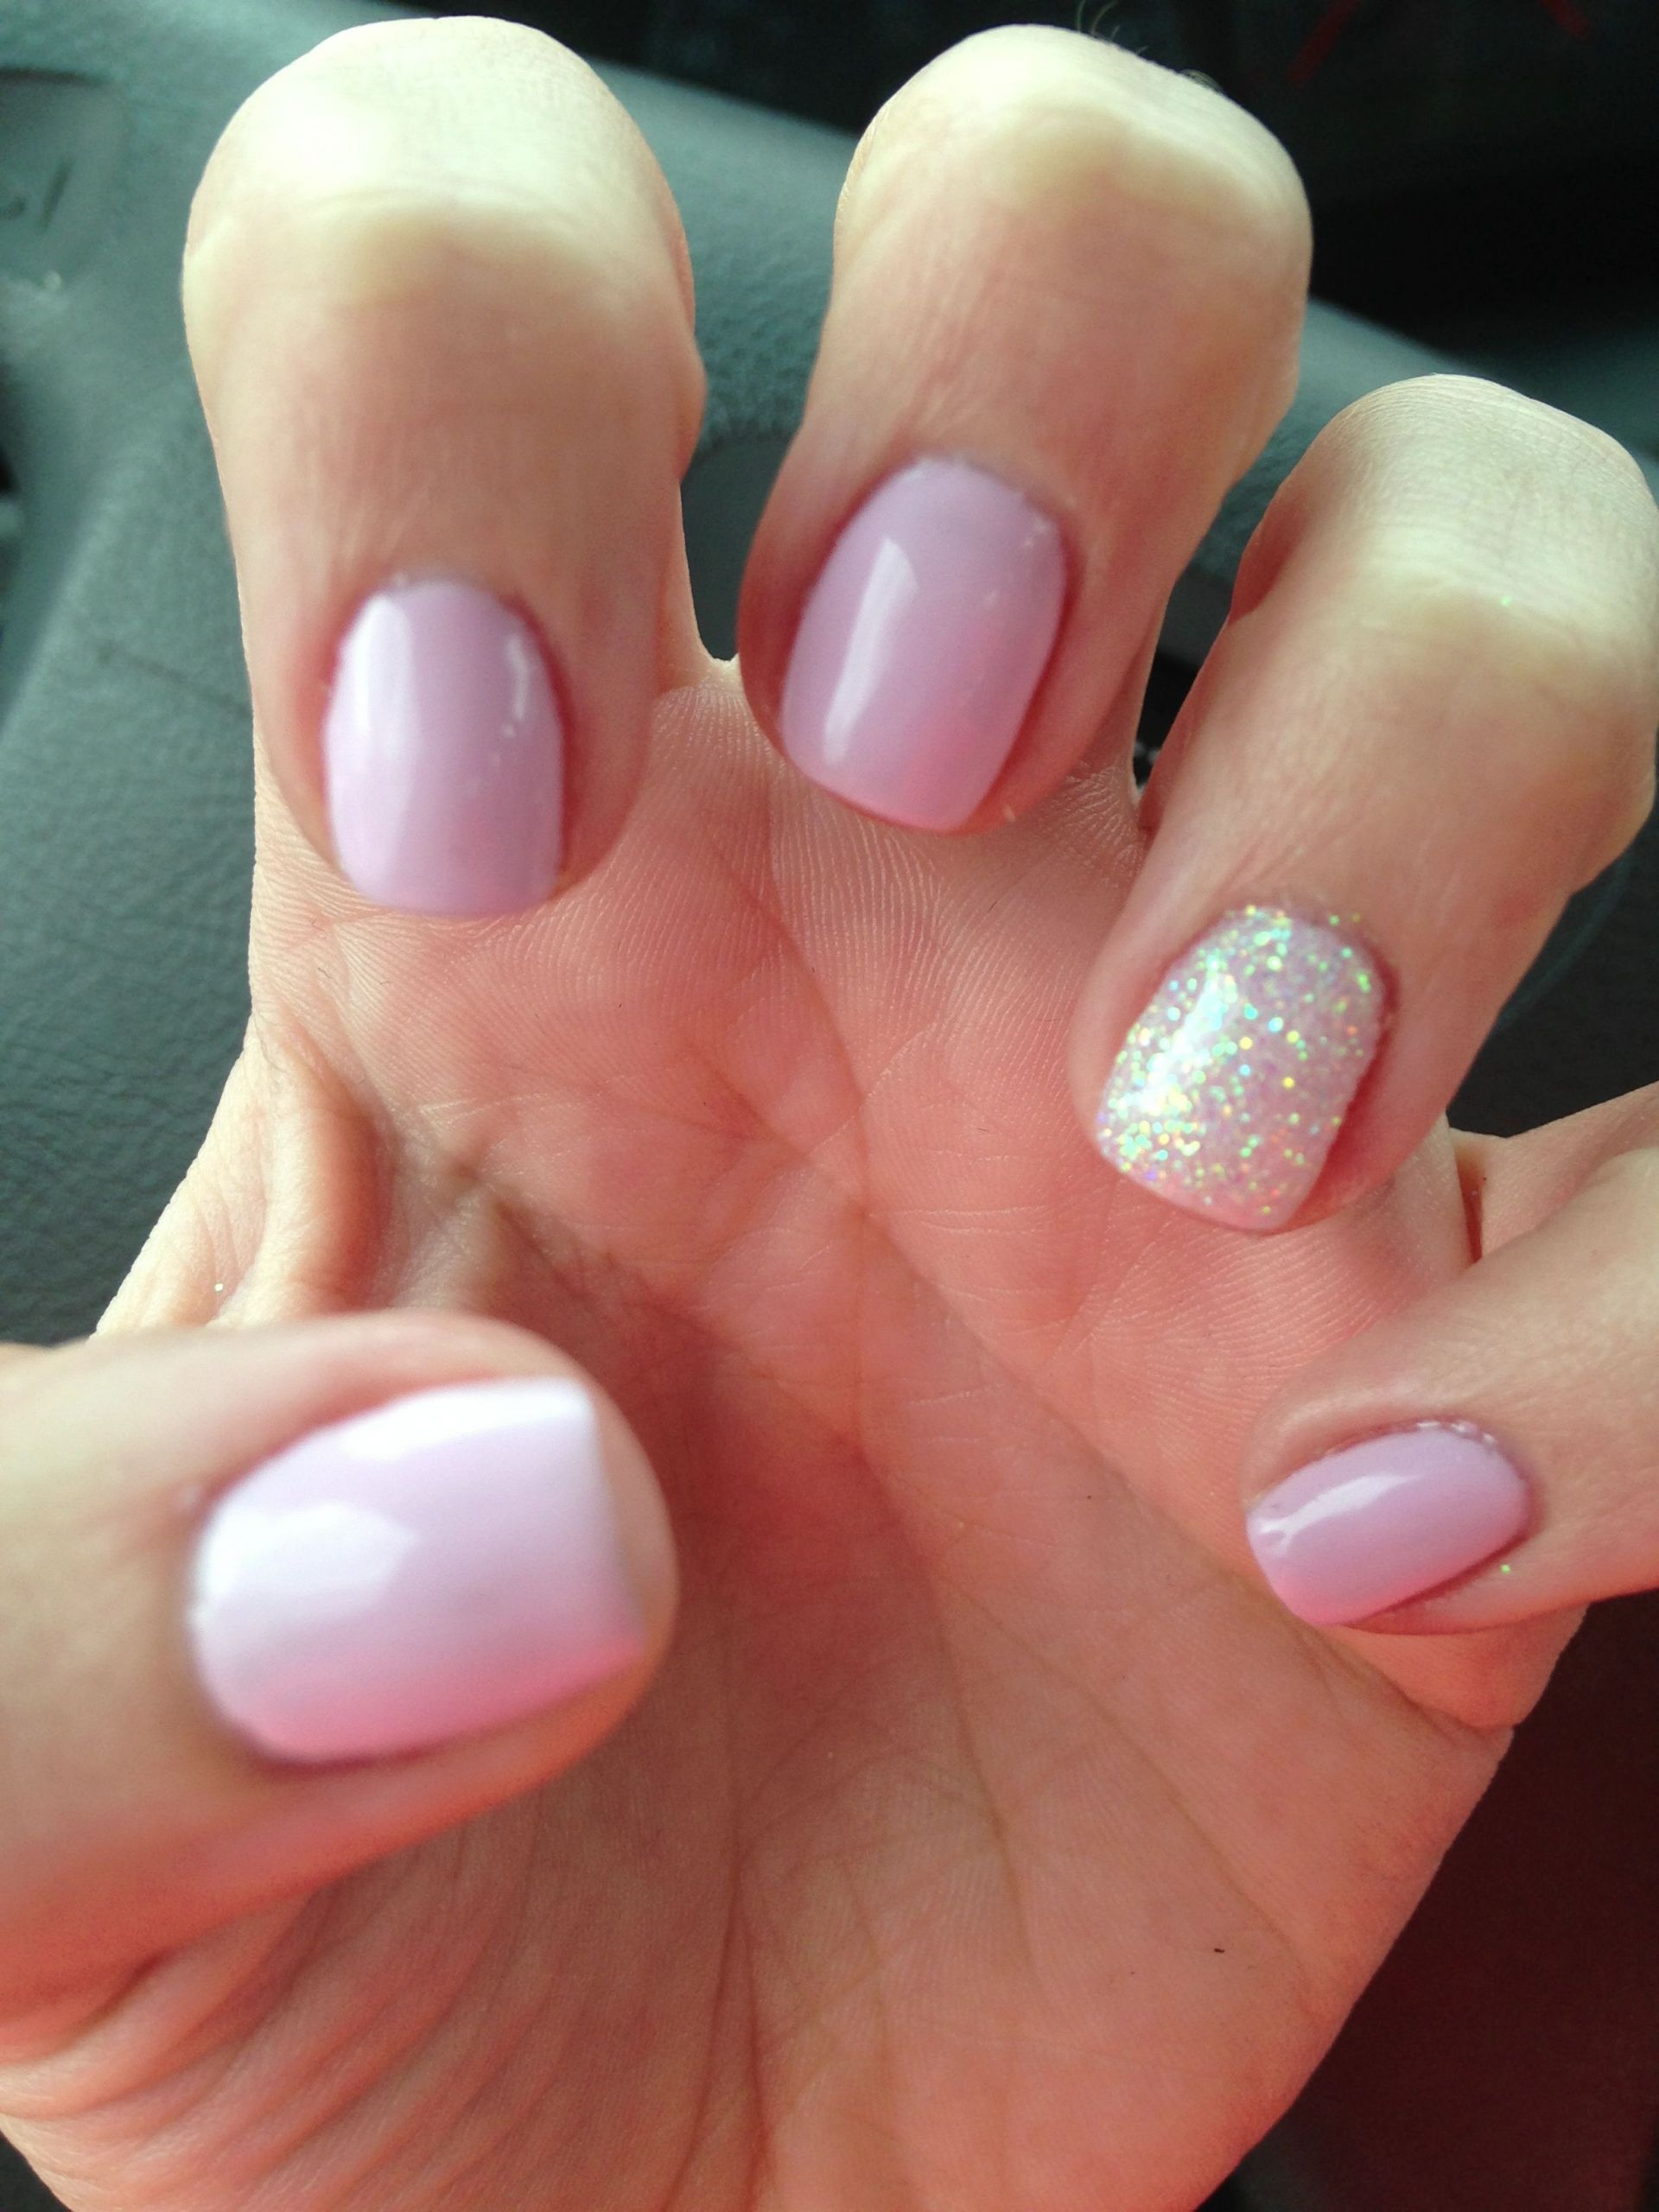 Wedding Shellac Nails
 Cake pop pink shellac with white glitter ascent nail